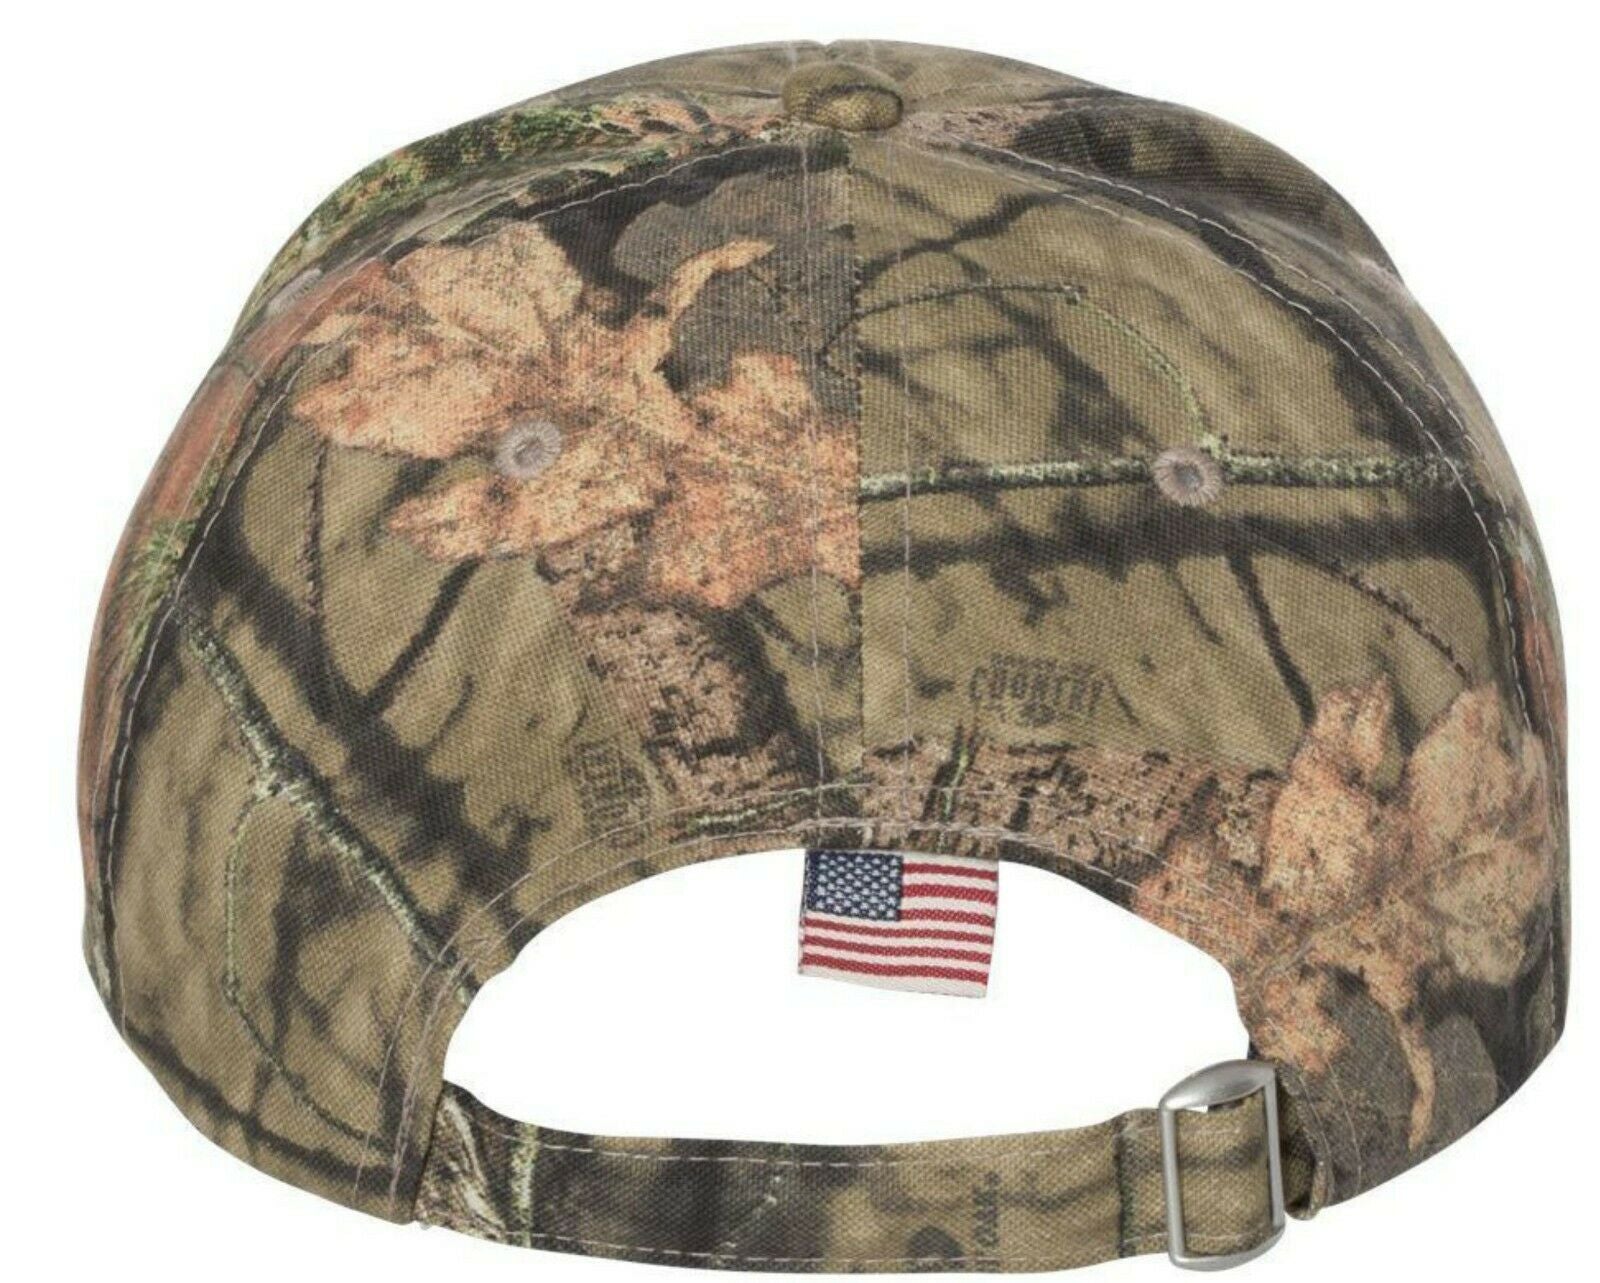 Freedom Convoy 2022 Embroidered Hat - USA300 Style Adjustable Hats - Various - Powercall Sirens LLC